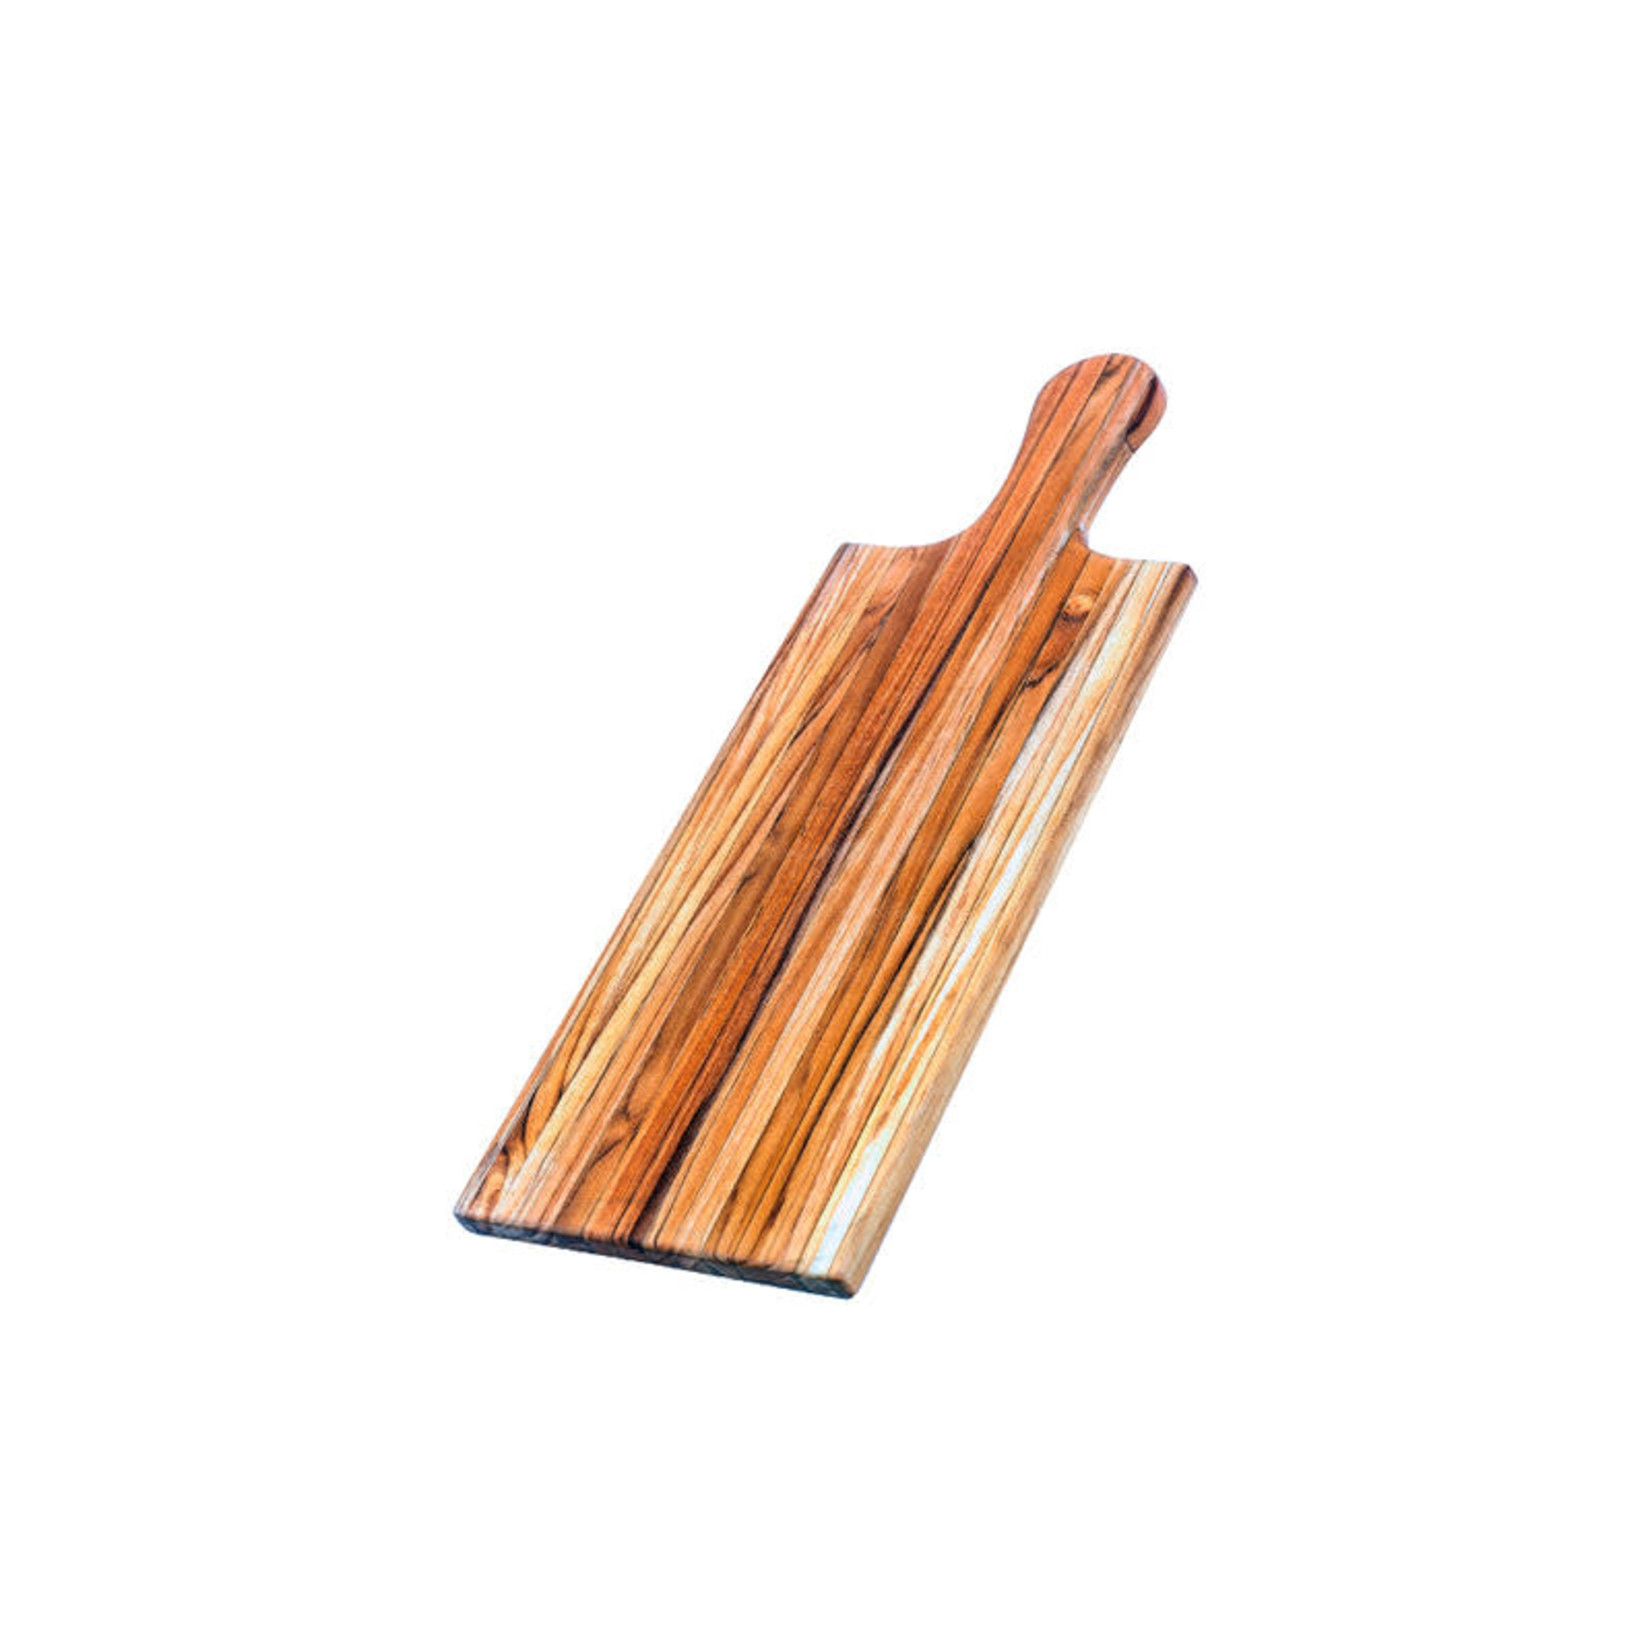 TeakHaus Table Plank Serving Board (S)